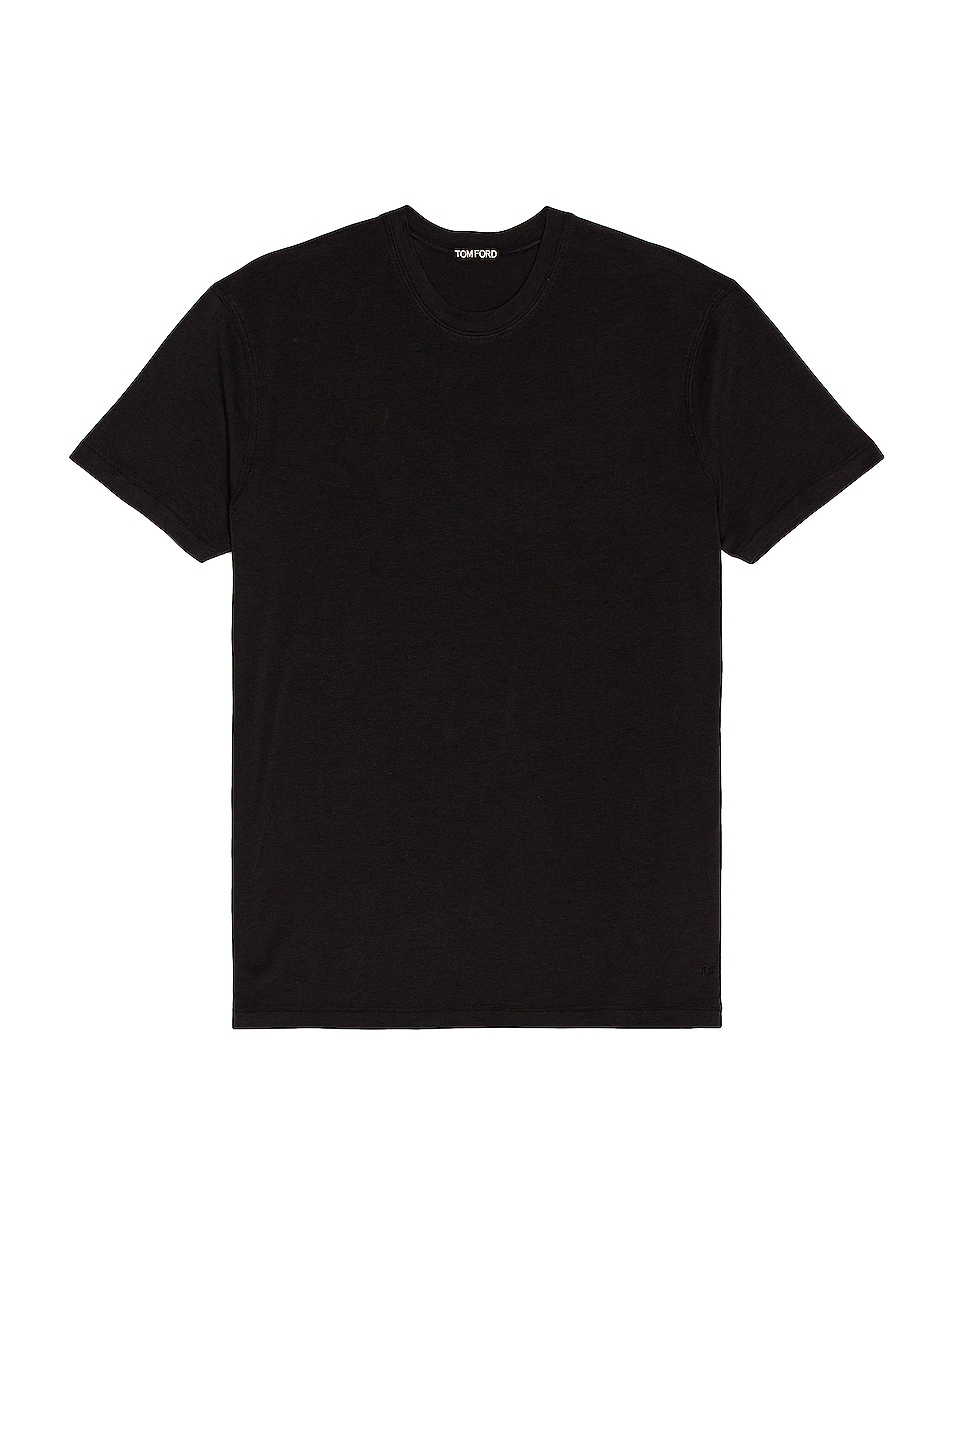 Image 1 of TOM FORD Viscose Cotton Tee in Black